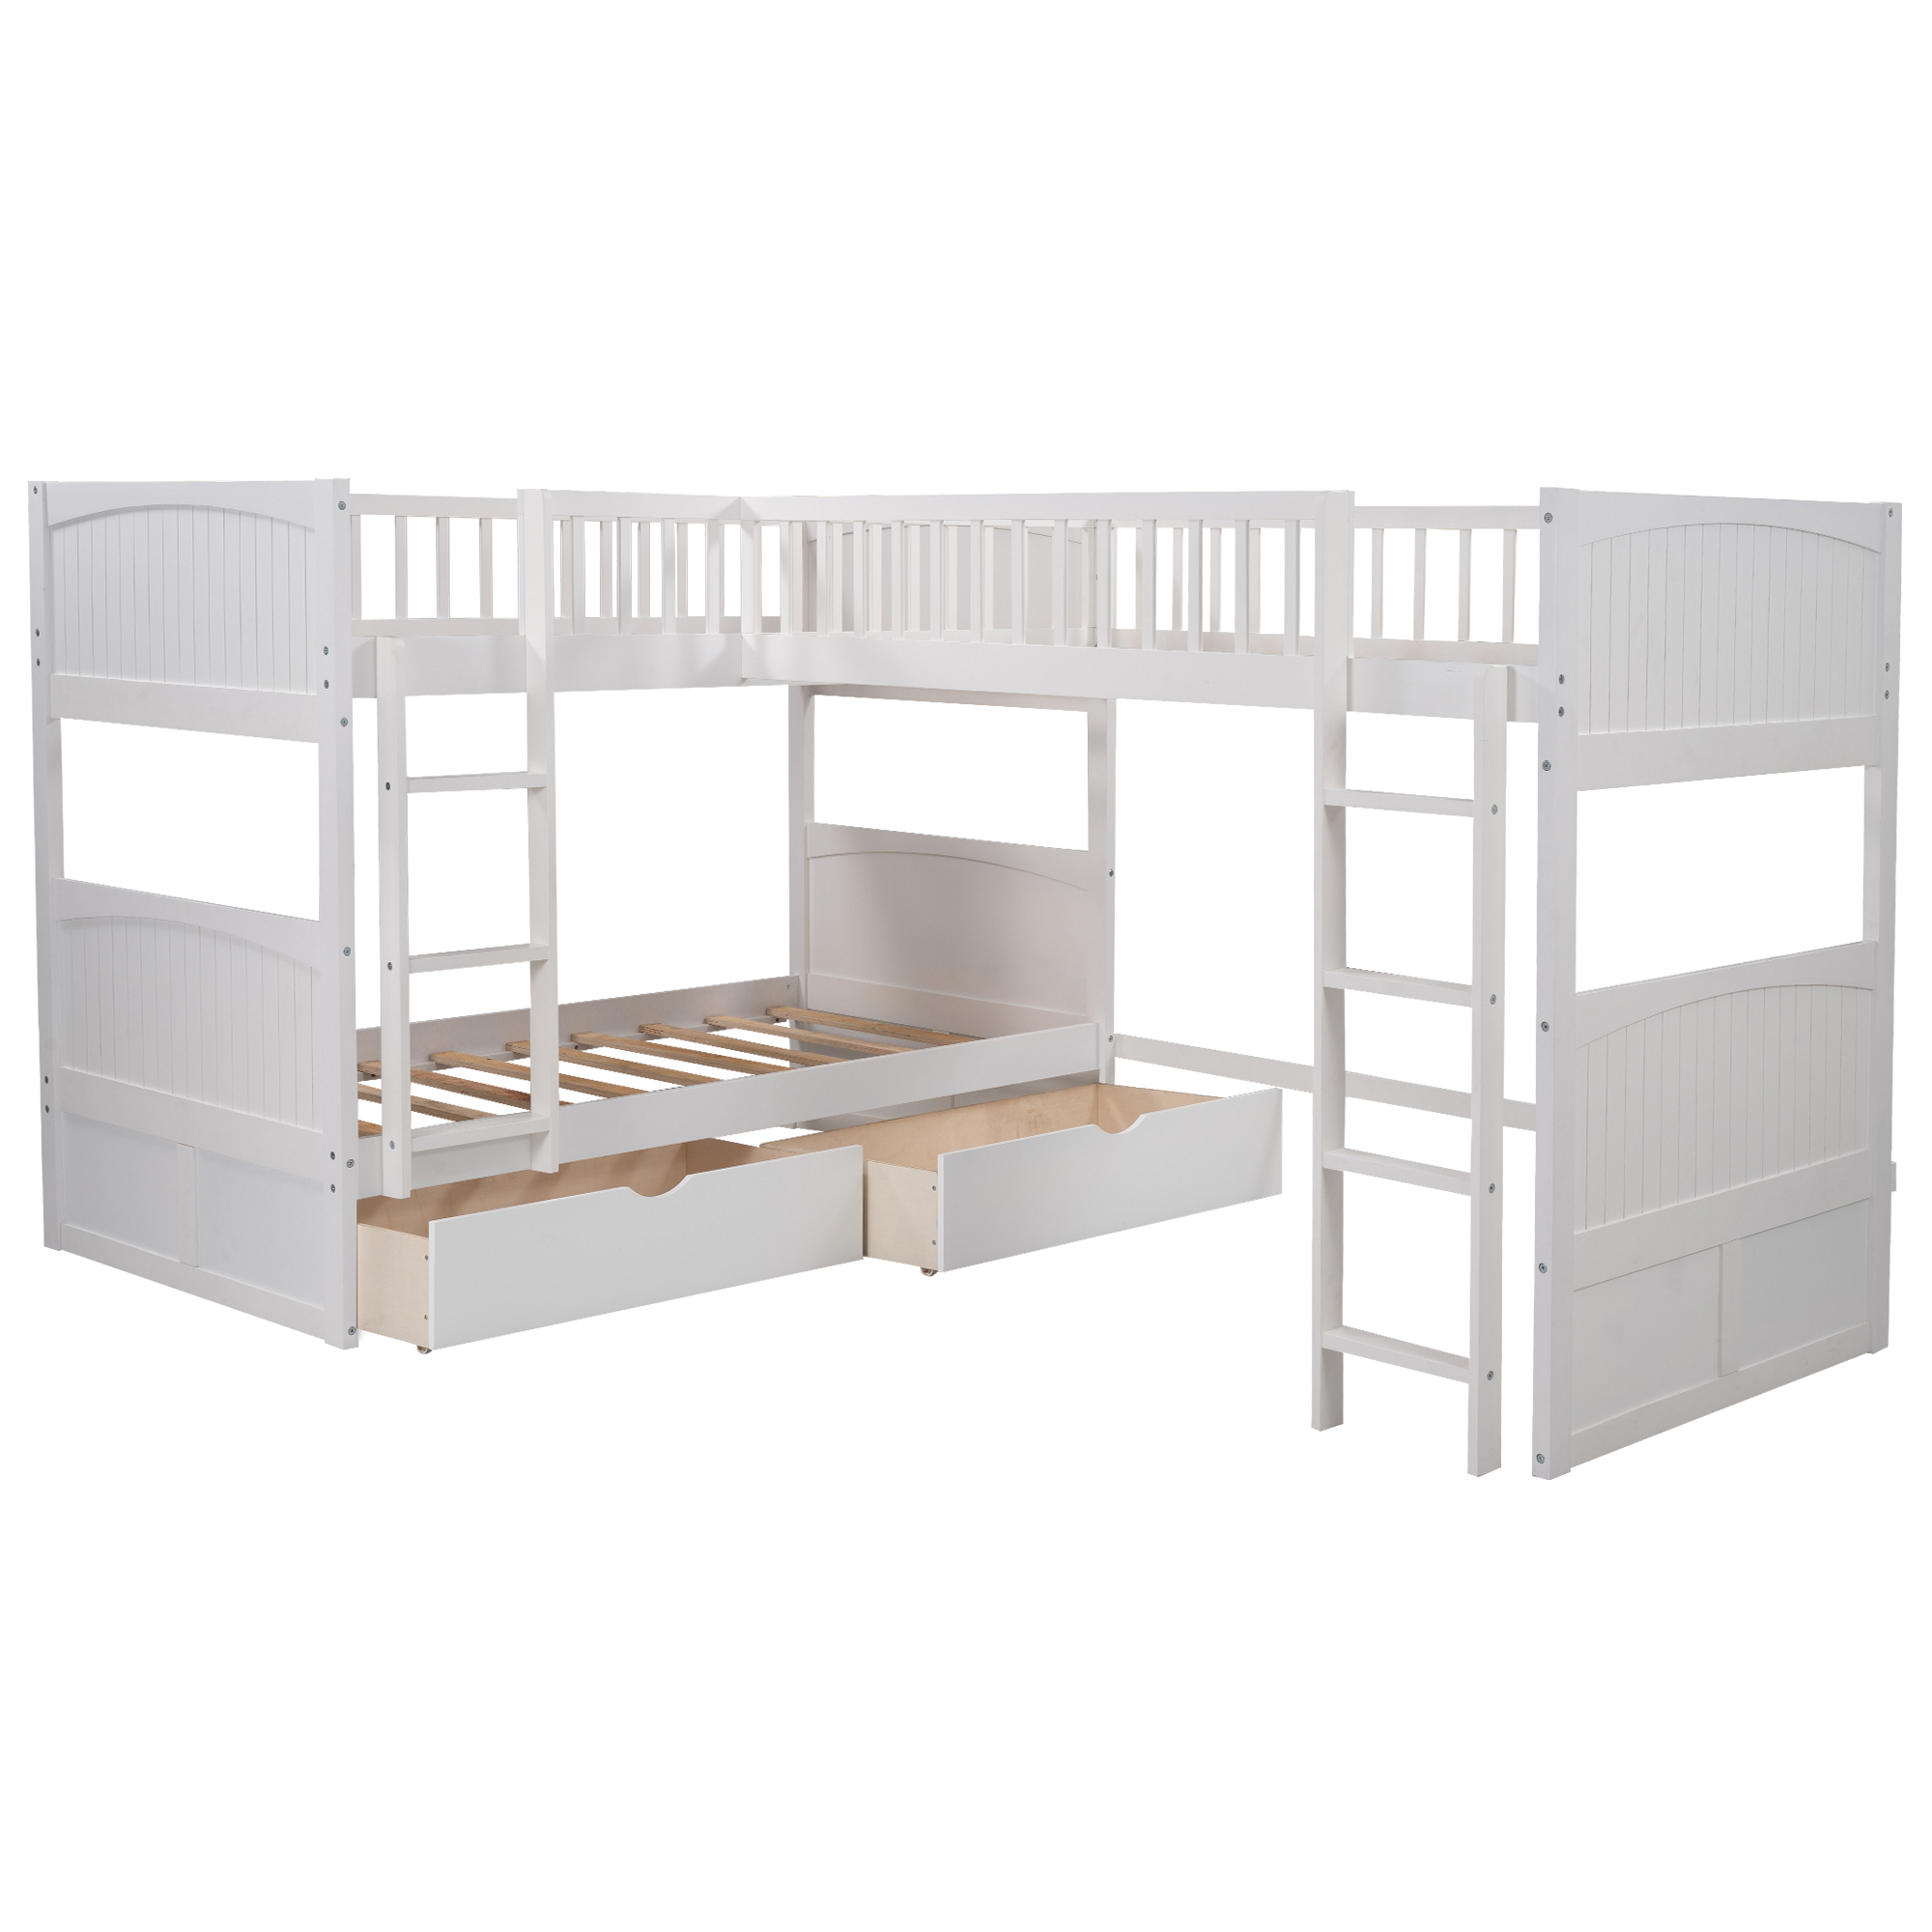 Euroco Wood Bunk Bed Storage, Twin-over-Twin-over-Twin for Children's Bedroom, White - image 5 of 12